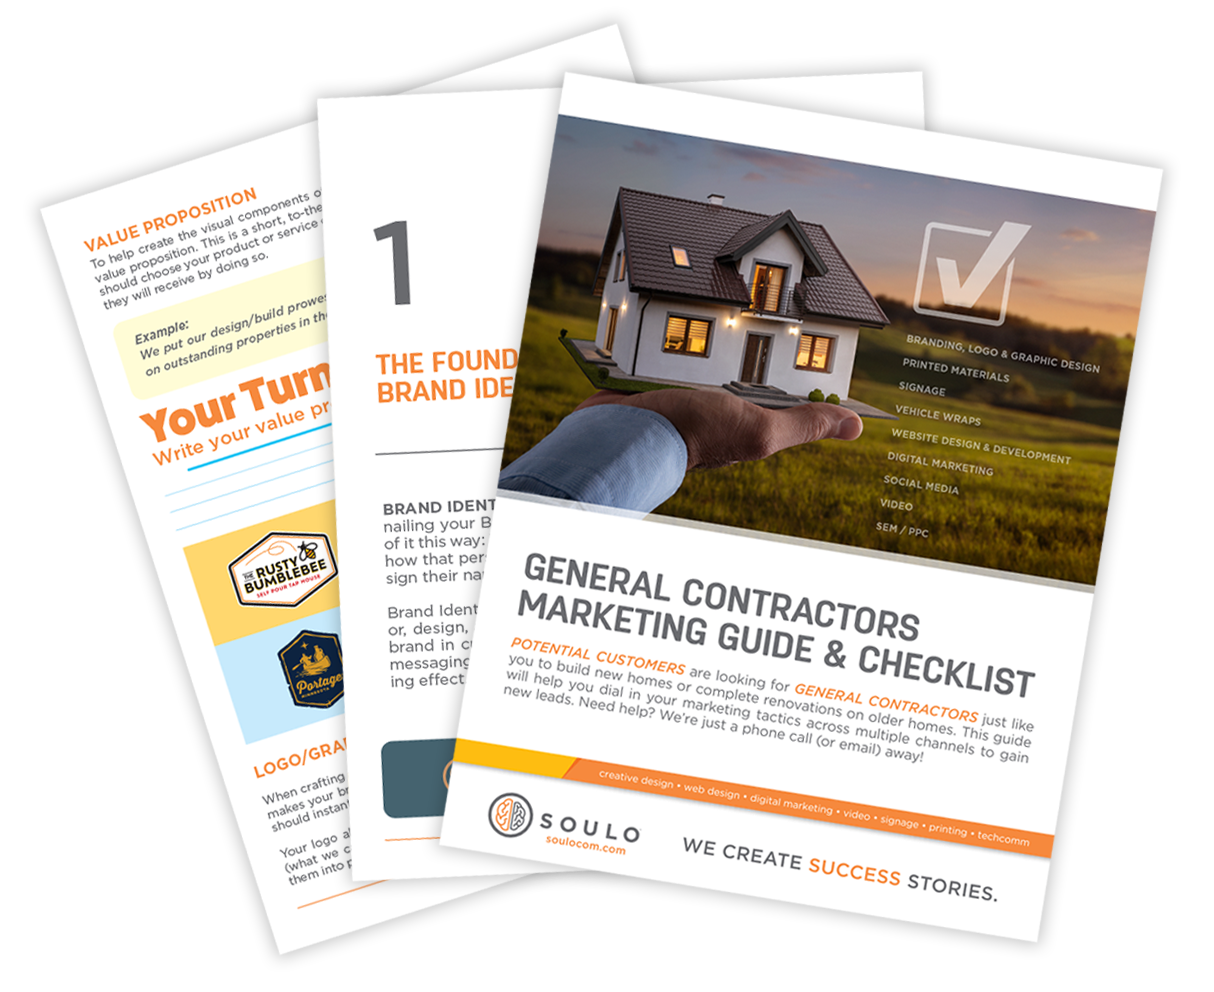 Thumbnail of SOULO's general contractor marketing guide.